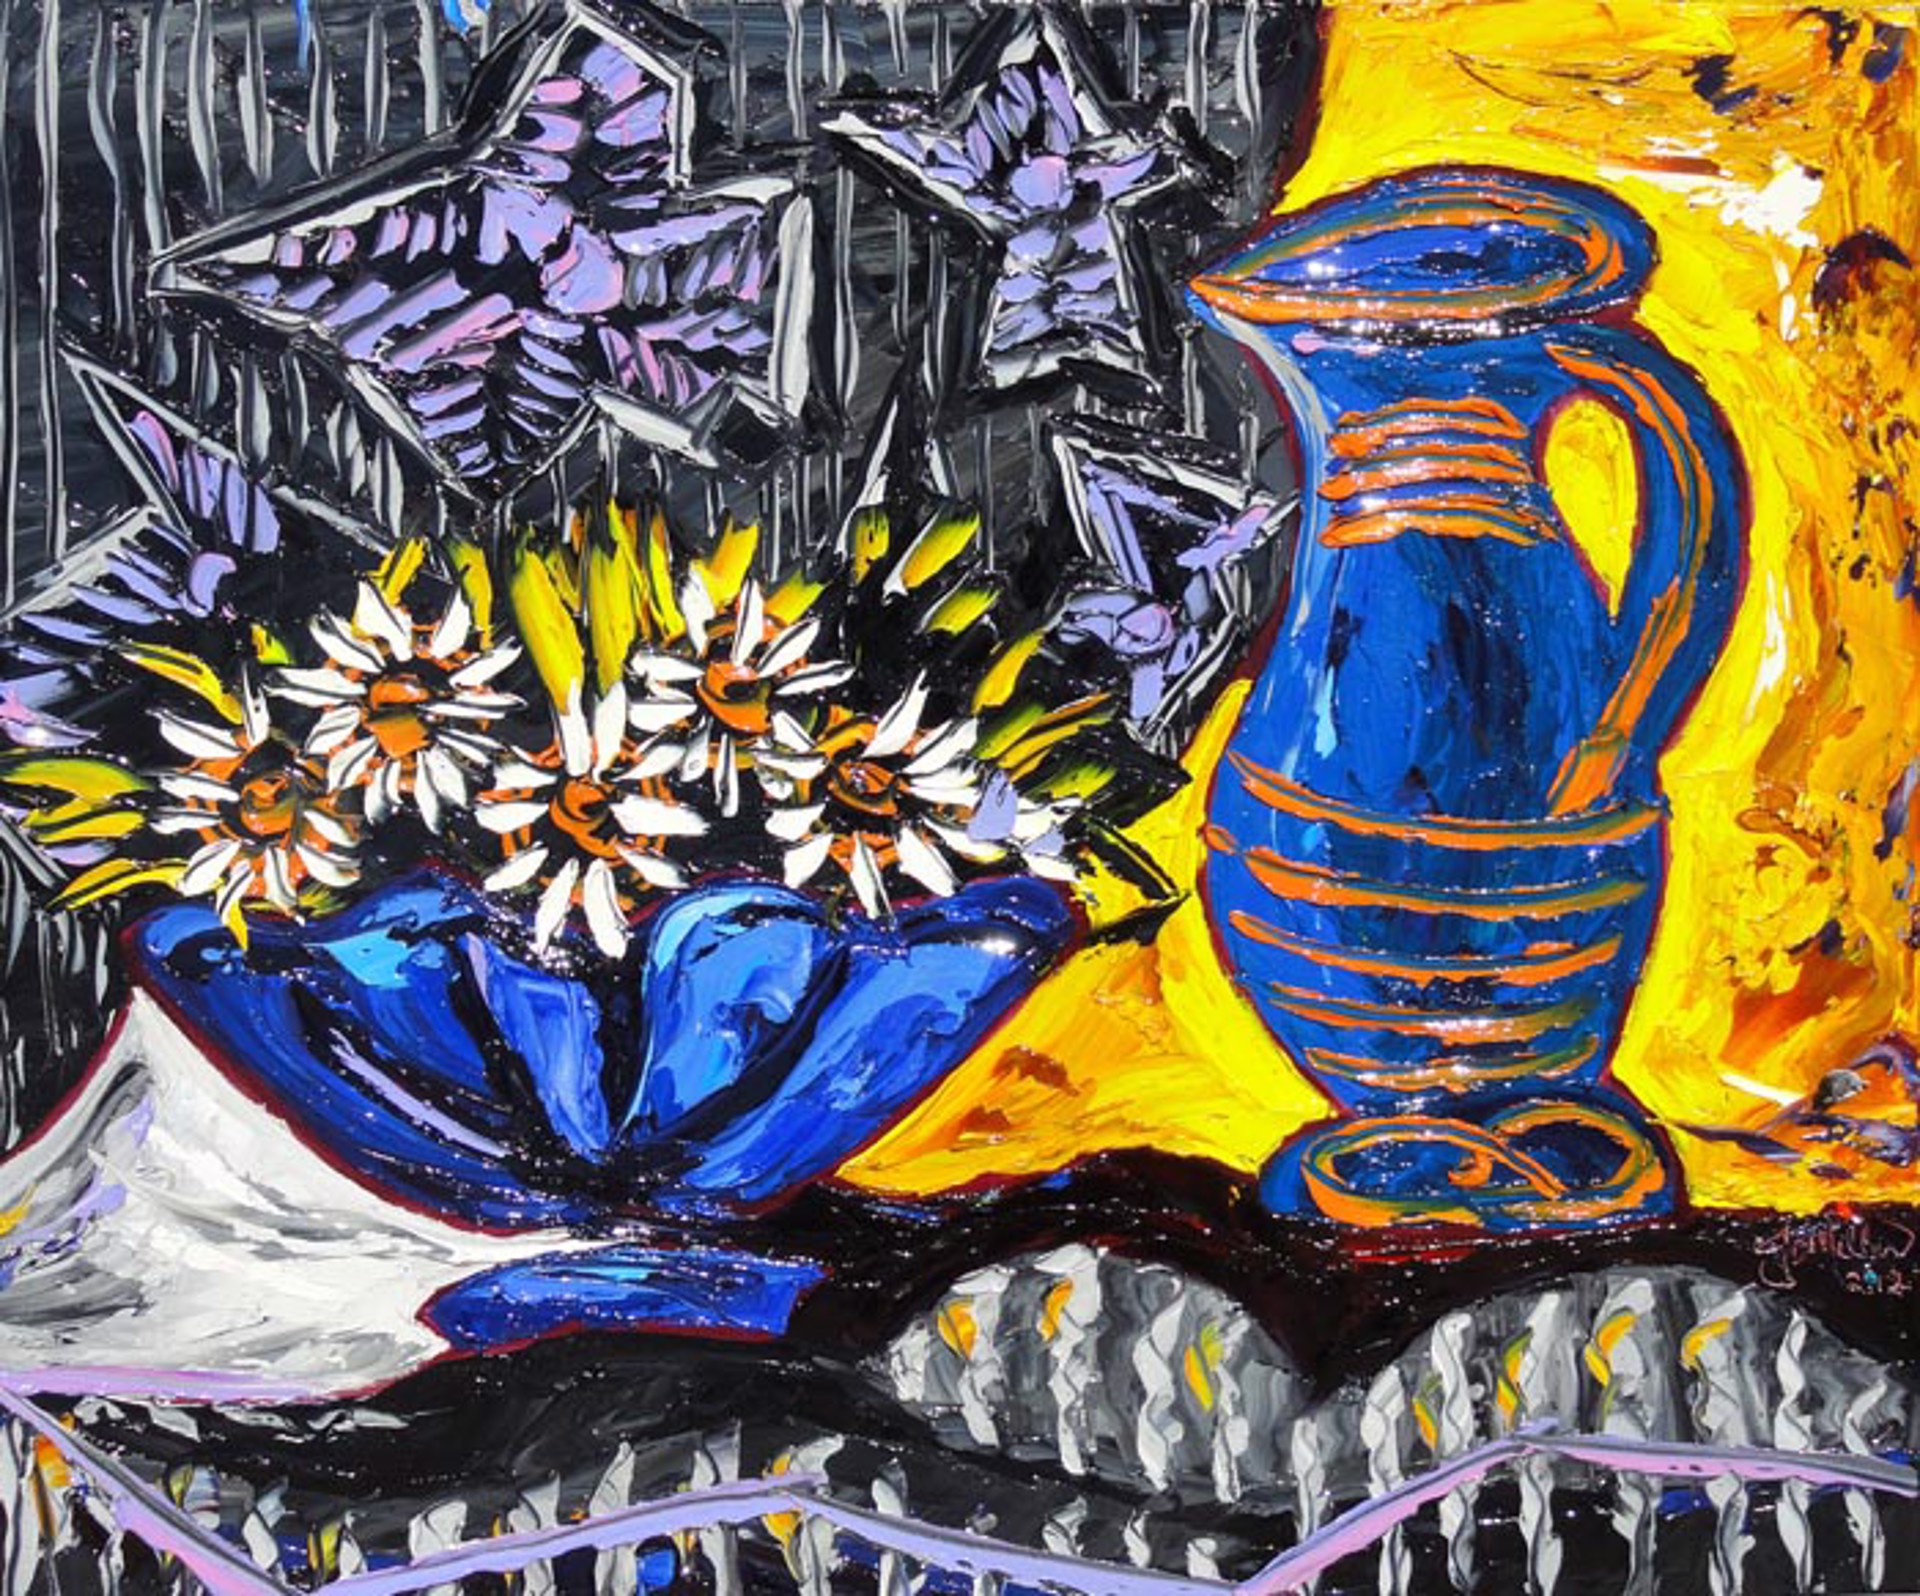 Basket of Flowers & Pitcher, after Picasso by JD Miller